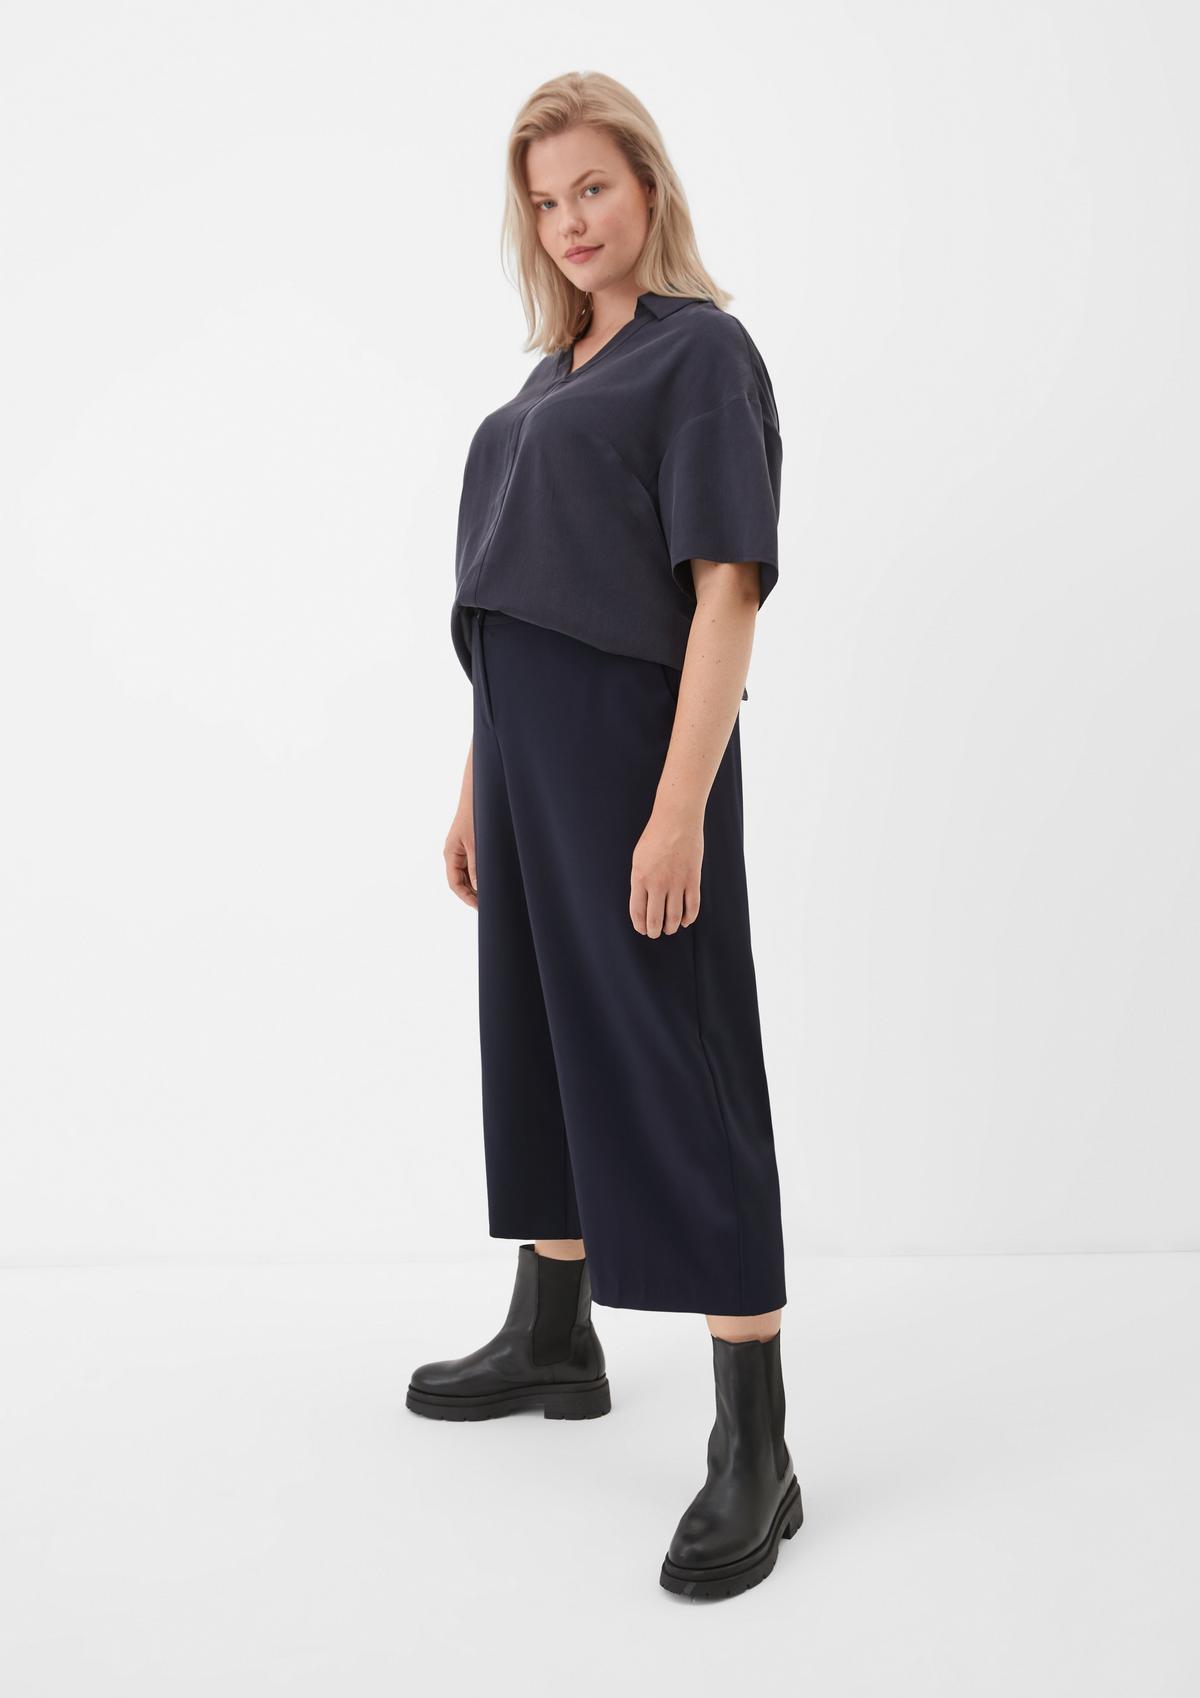 Culottes: Order now in the shop online